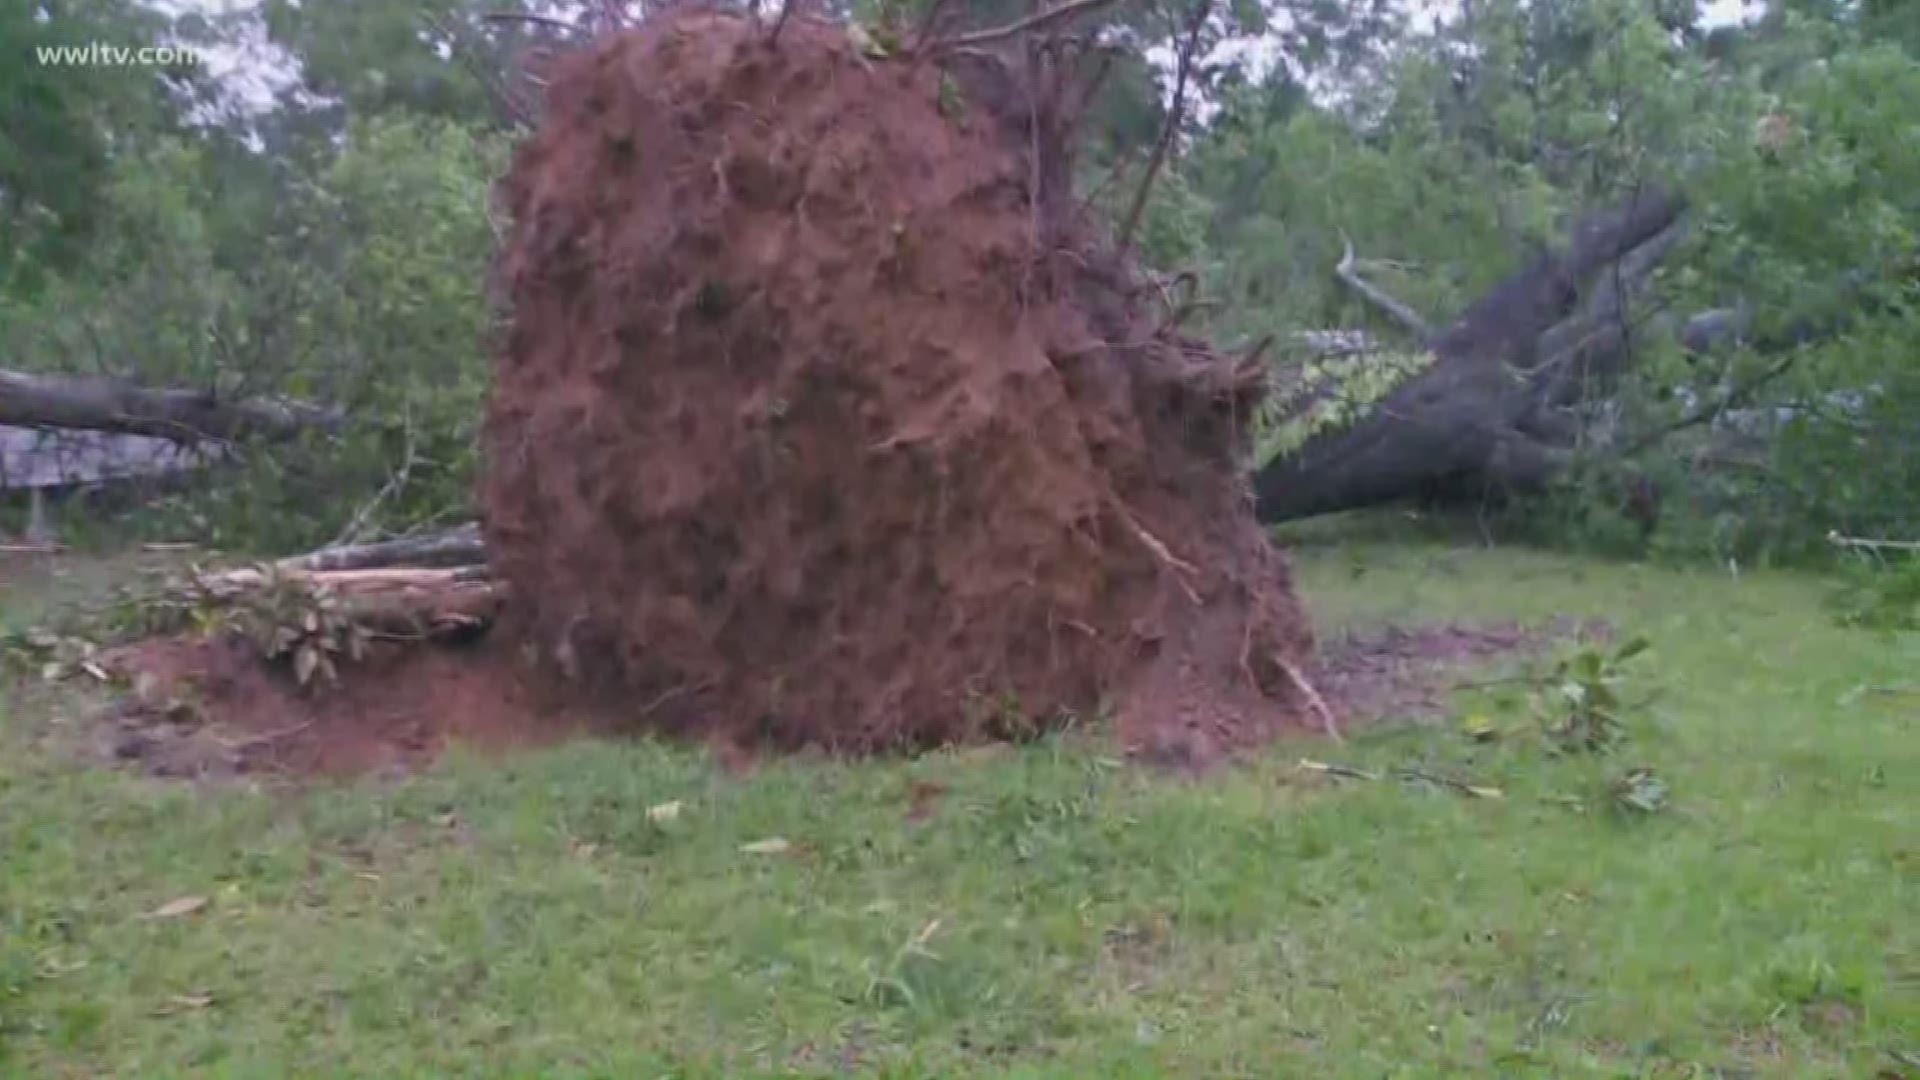 Officials believe a tornado touched down in Tangipahoa Parish, ripping trees up from their roots. Thankfully, no injuries have been reported.